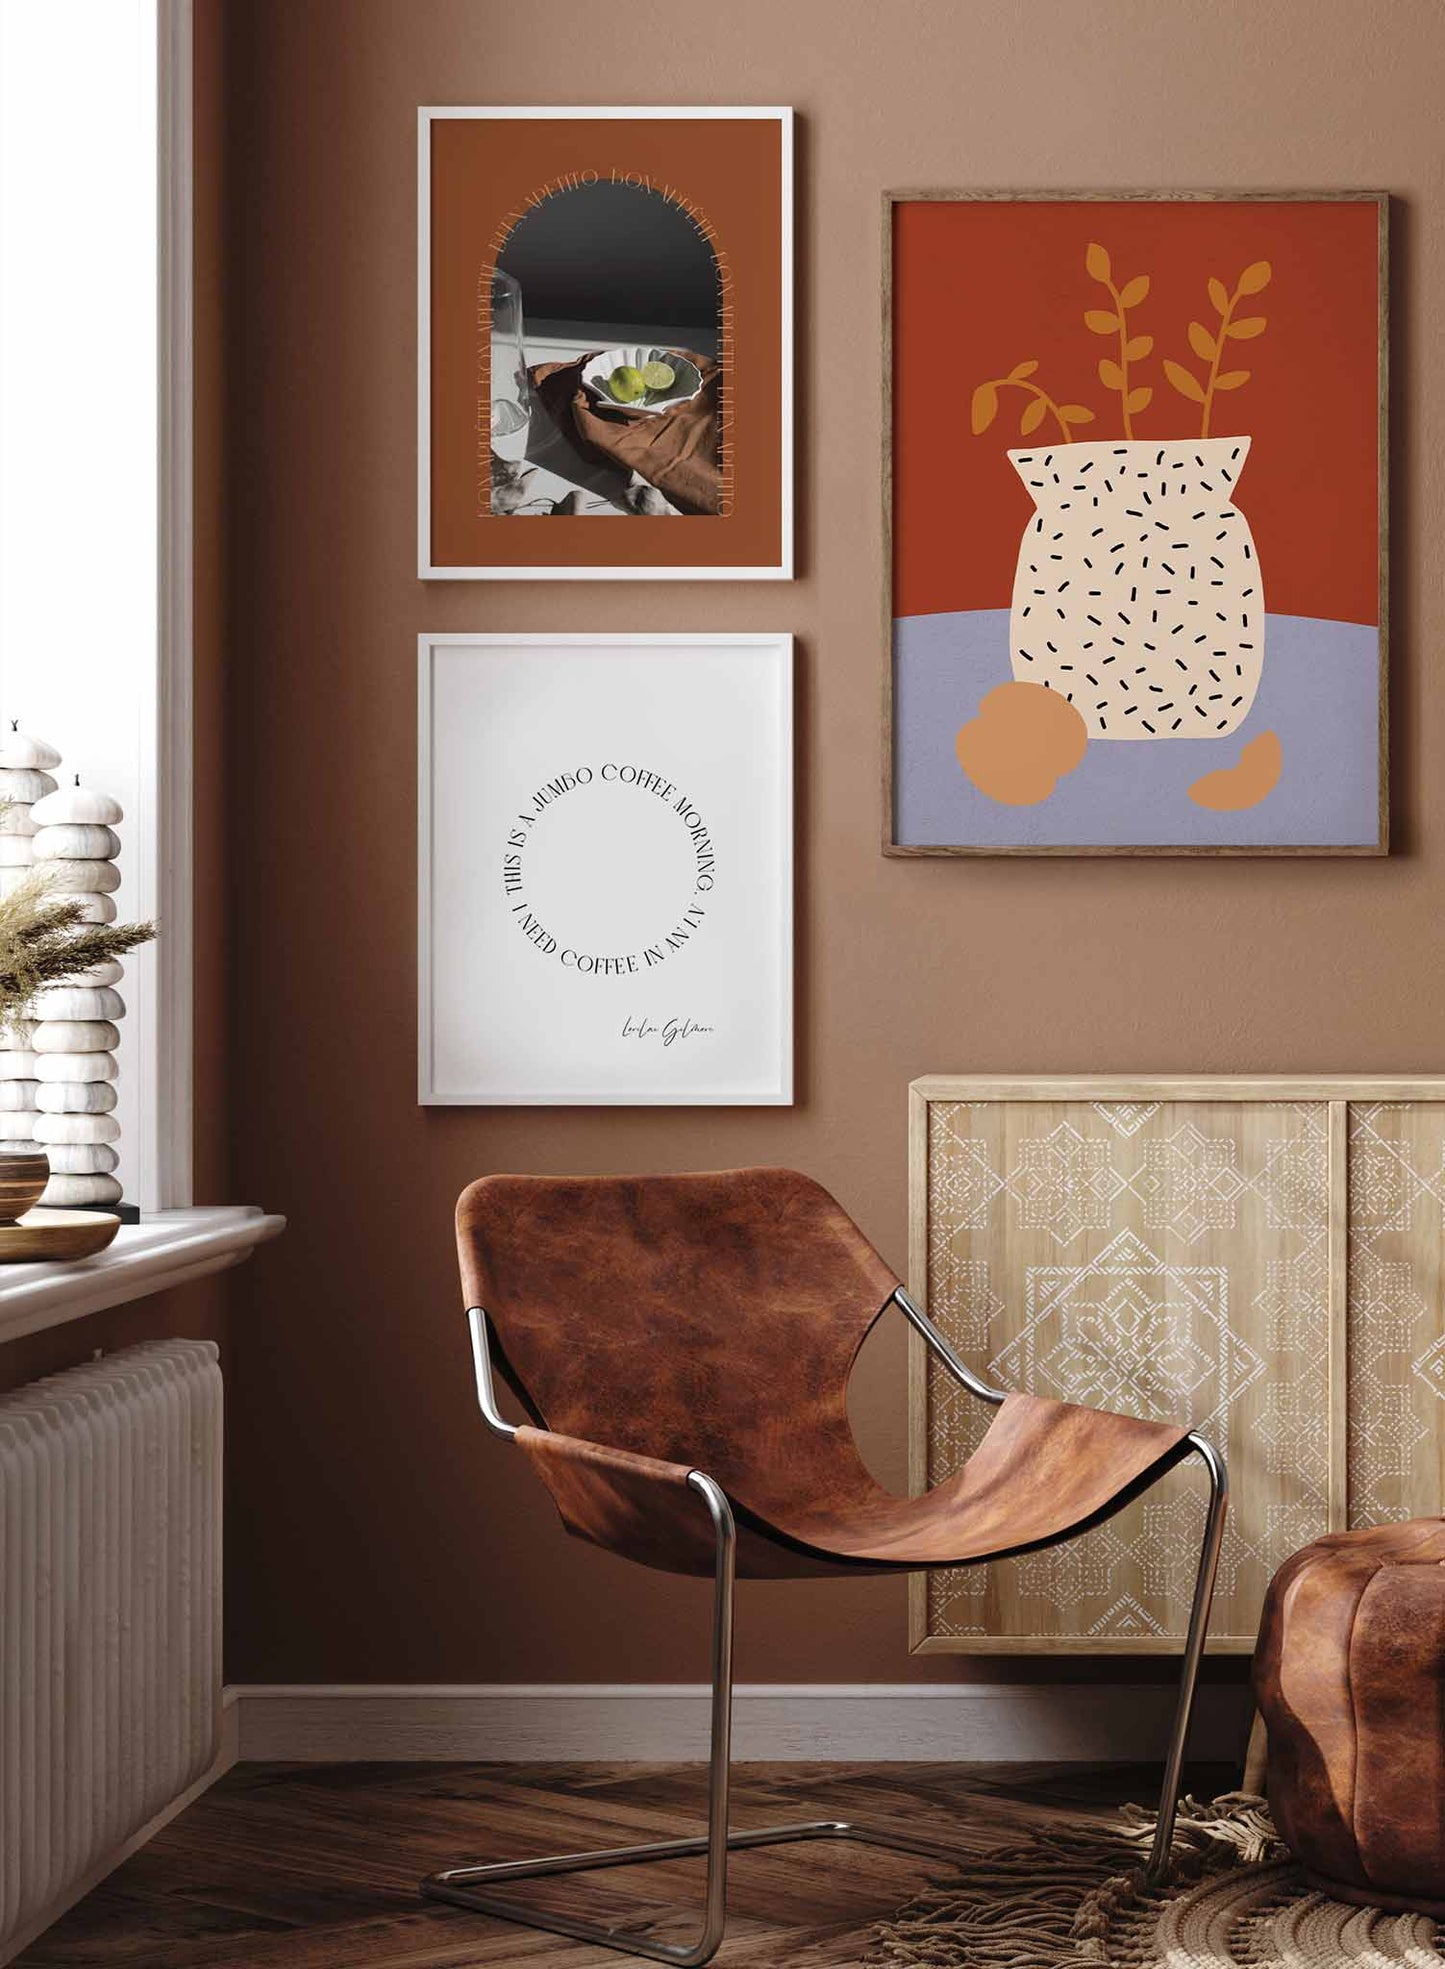 Minimalist Still Life is a fruit and vase illustration poster by Opposite Wall.